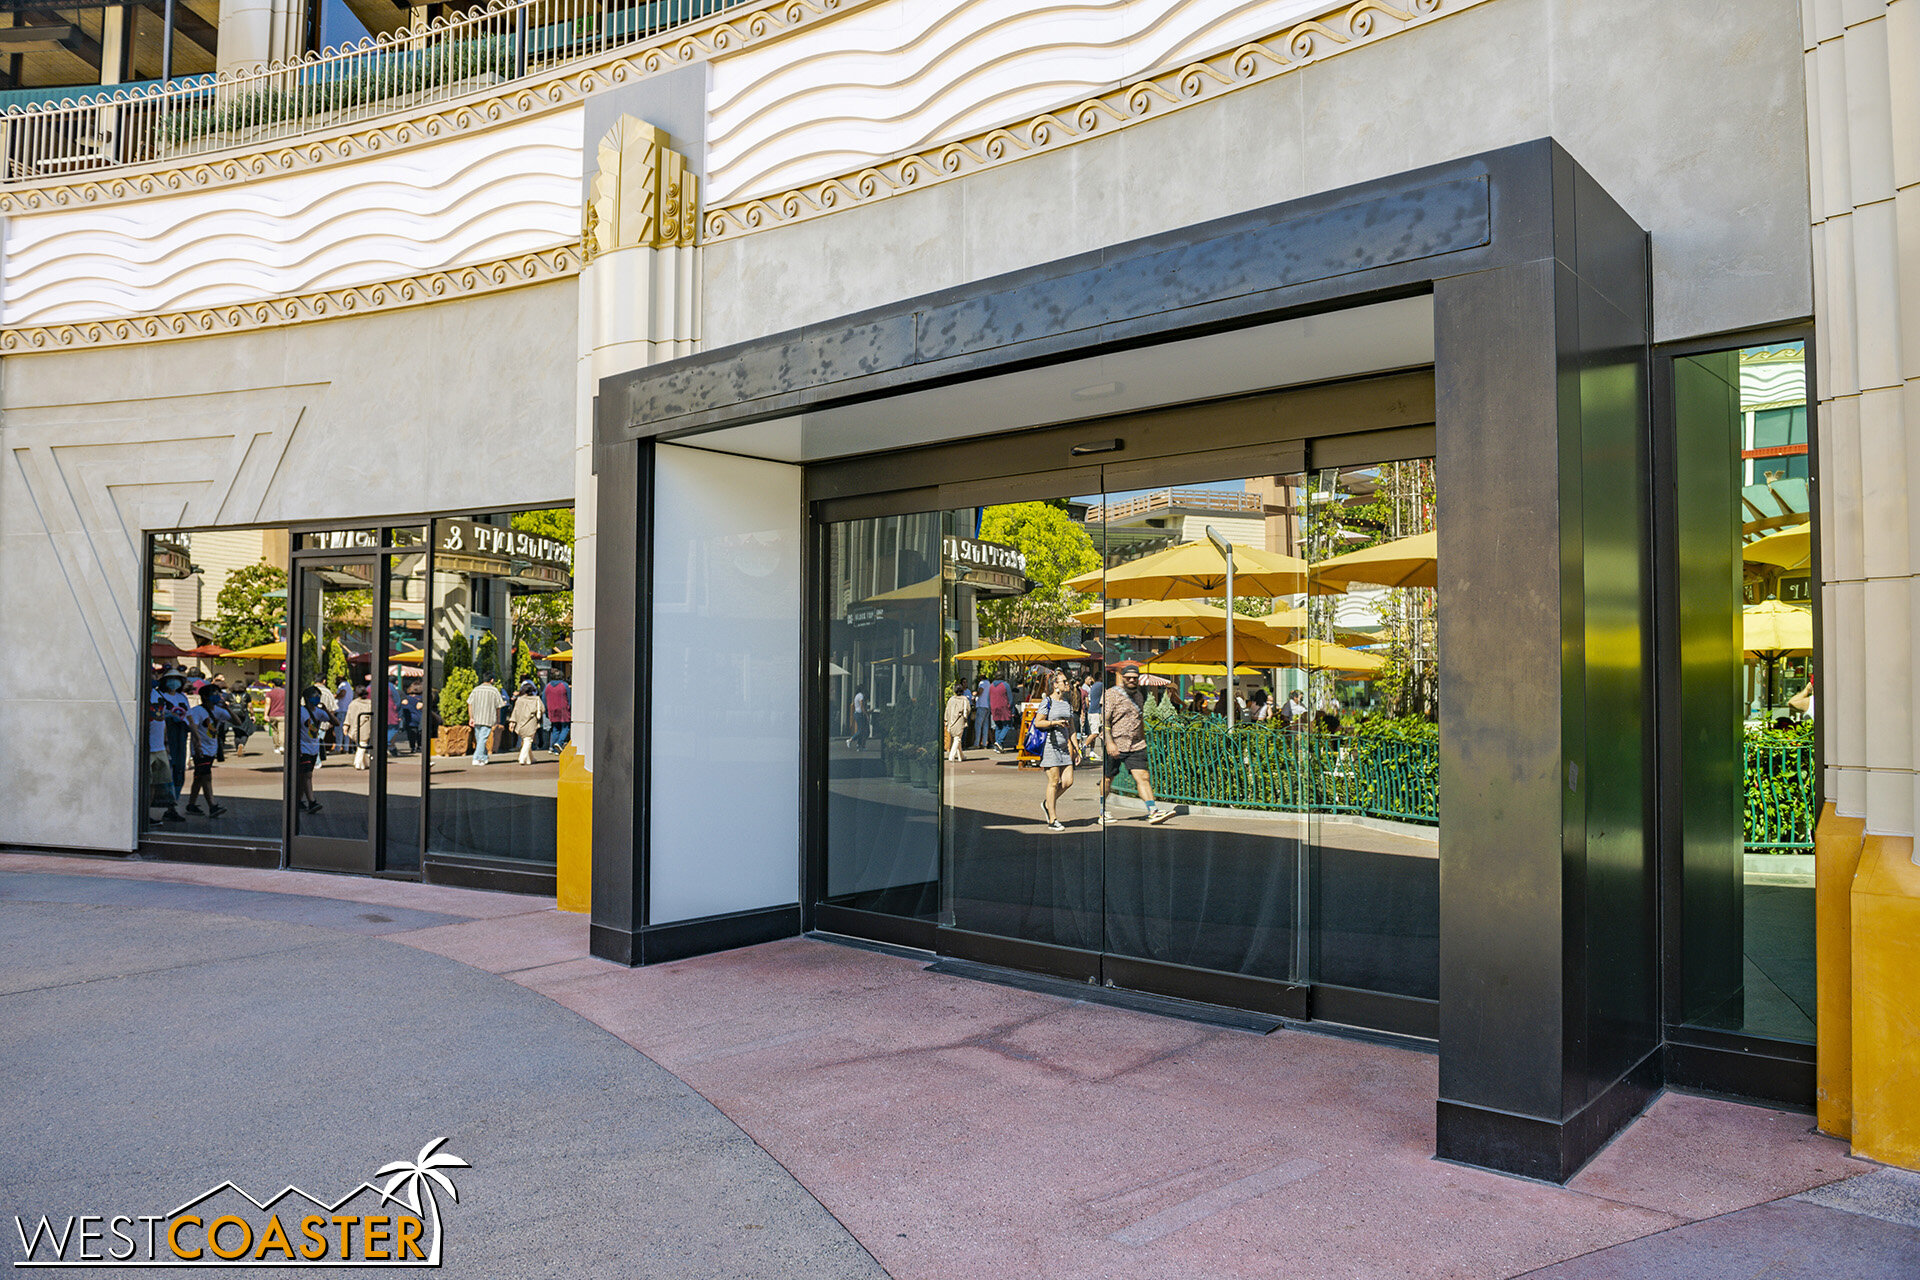  The VOID is no longer present at Downtown Disney, which has created a… void… in this storefront. 